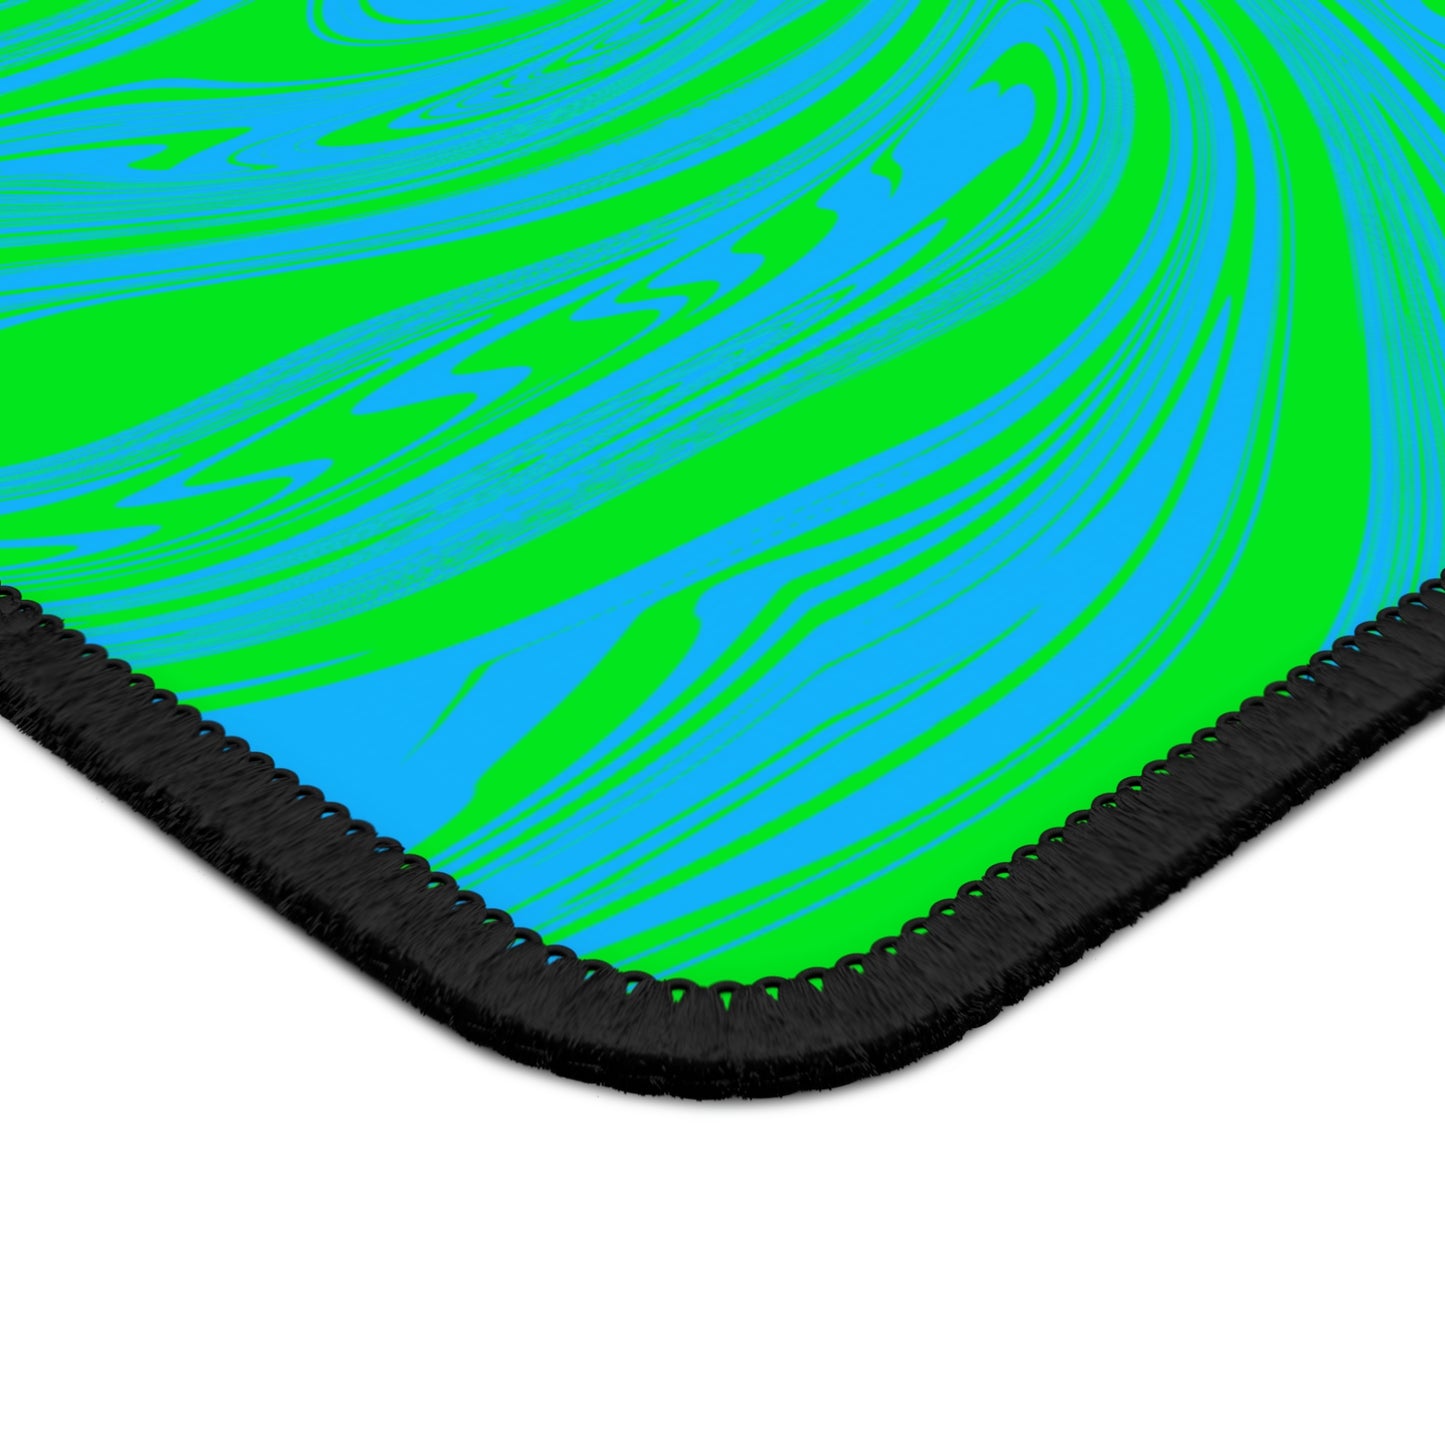 The corner of a gaming mouse pad with blue and green swirls.